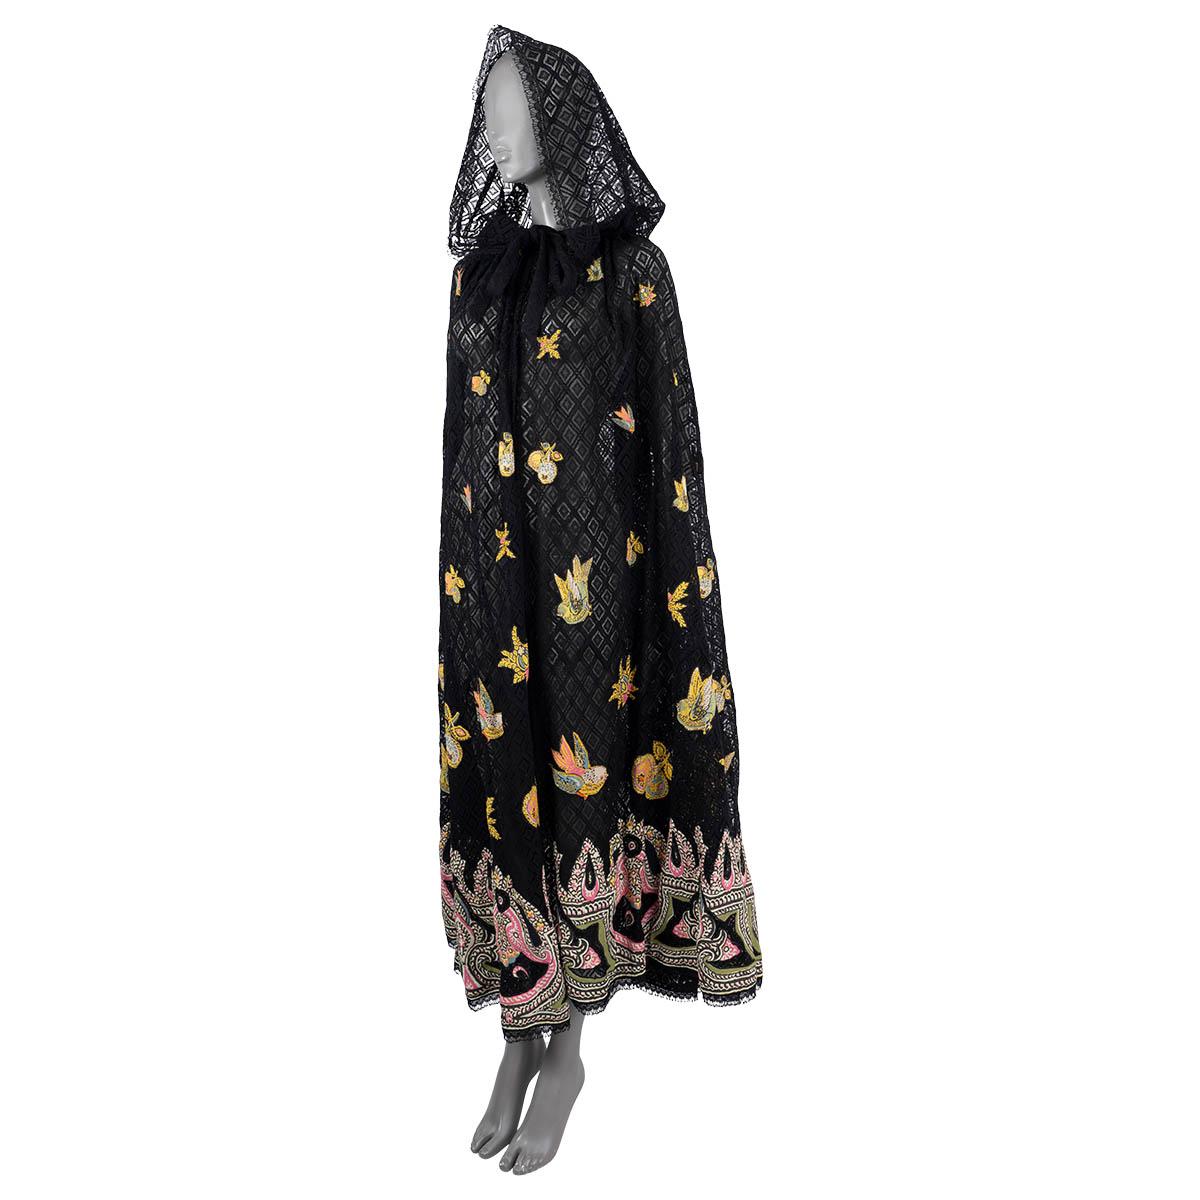 100% authentic Etro hooded lace cape in black cotton (62%), viscose (30%) and polyamide (8%). The design features a hood with tie laces, lace detailing and appliqué details that are decorated by apples, birds and an intarsia paisley border in